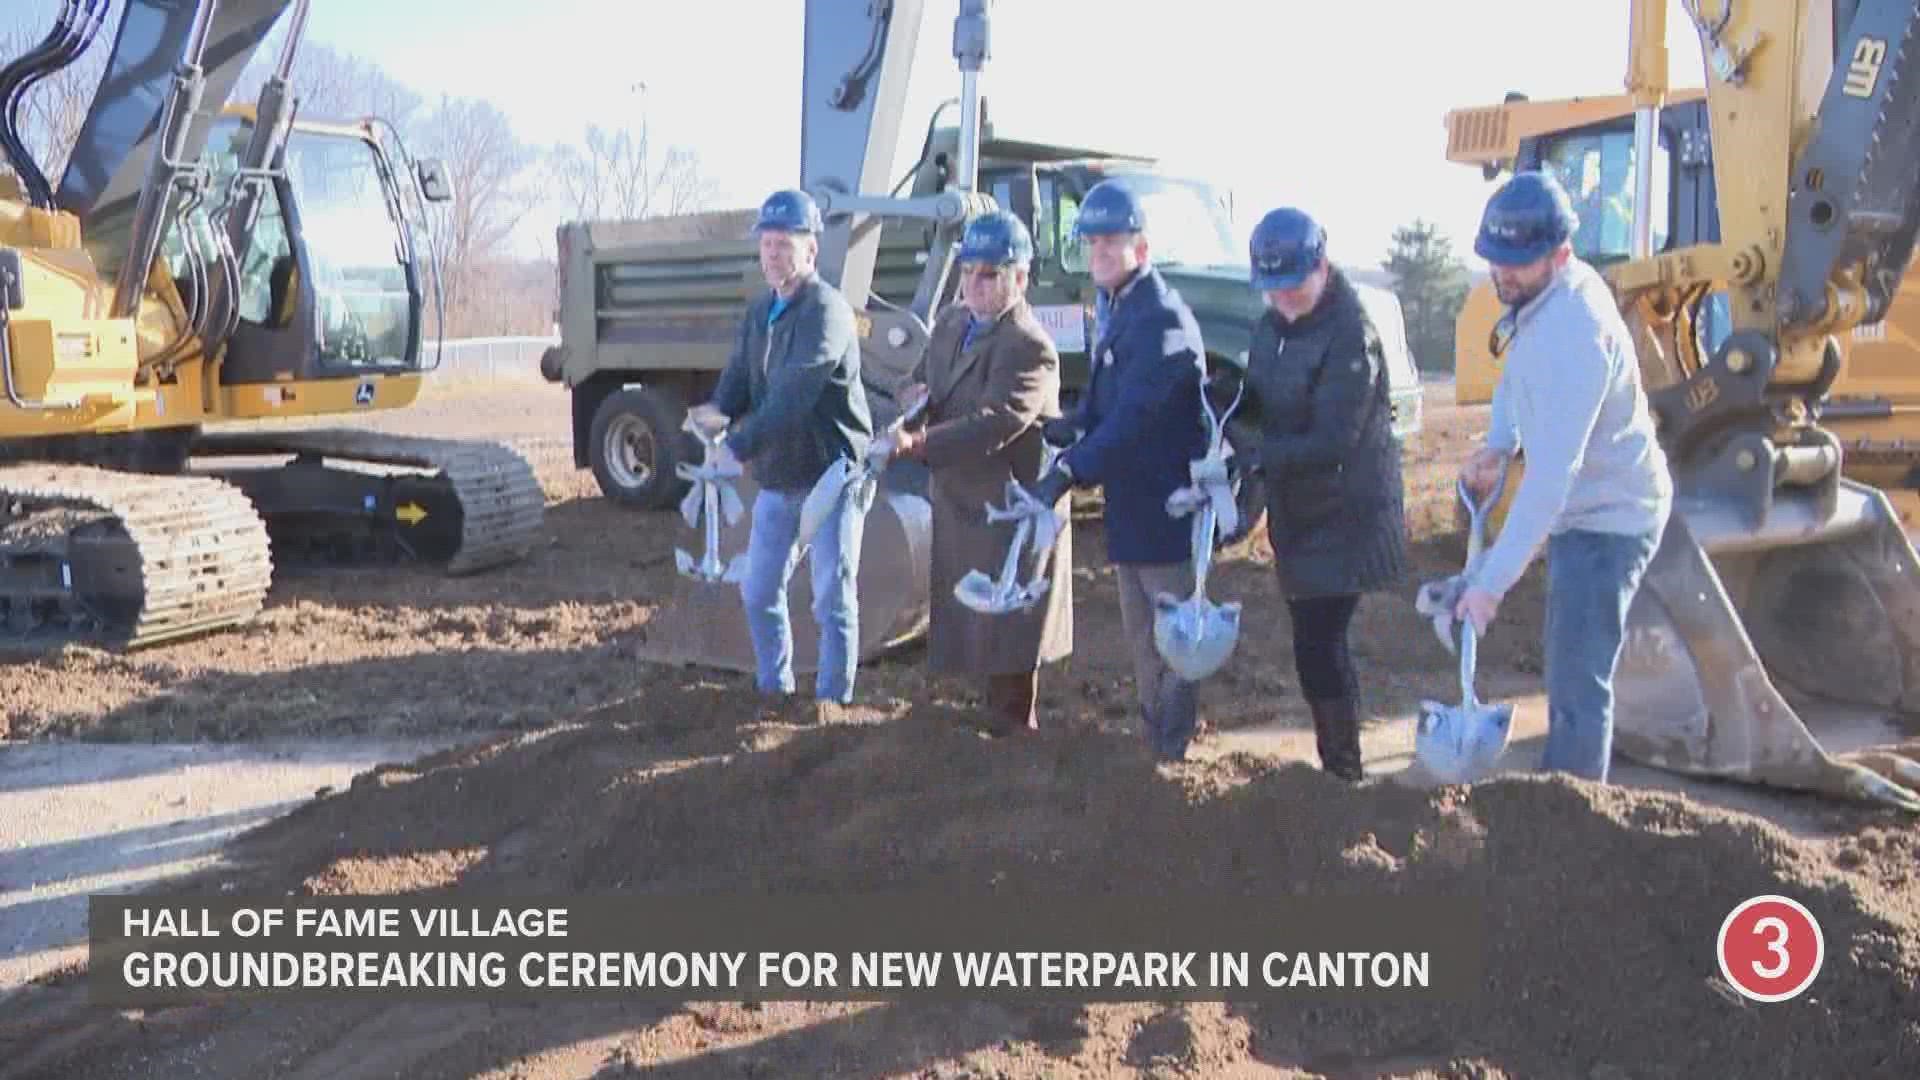 Construction is expected to take two years on the new waterpark, which is part of Phase II for the Hall of Fame Village in Canton.